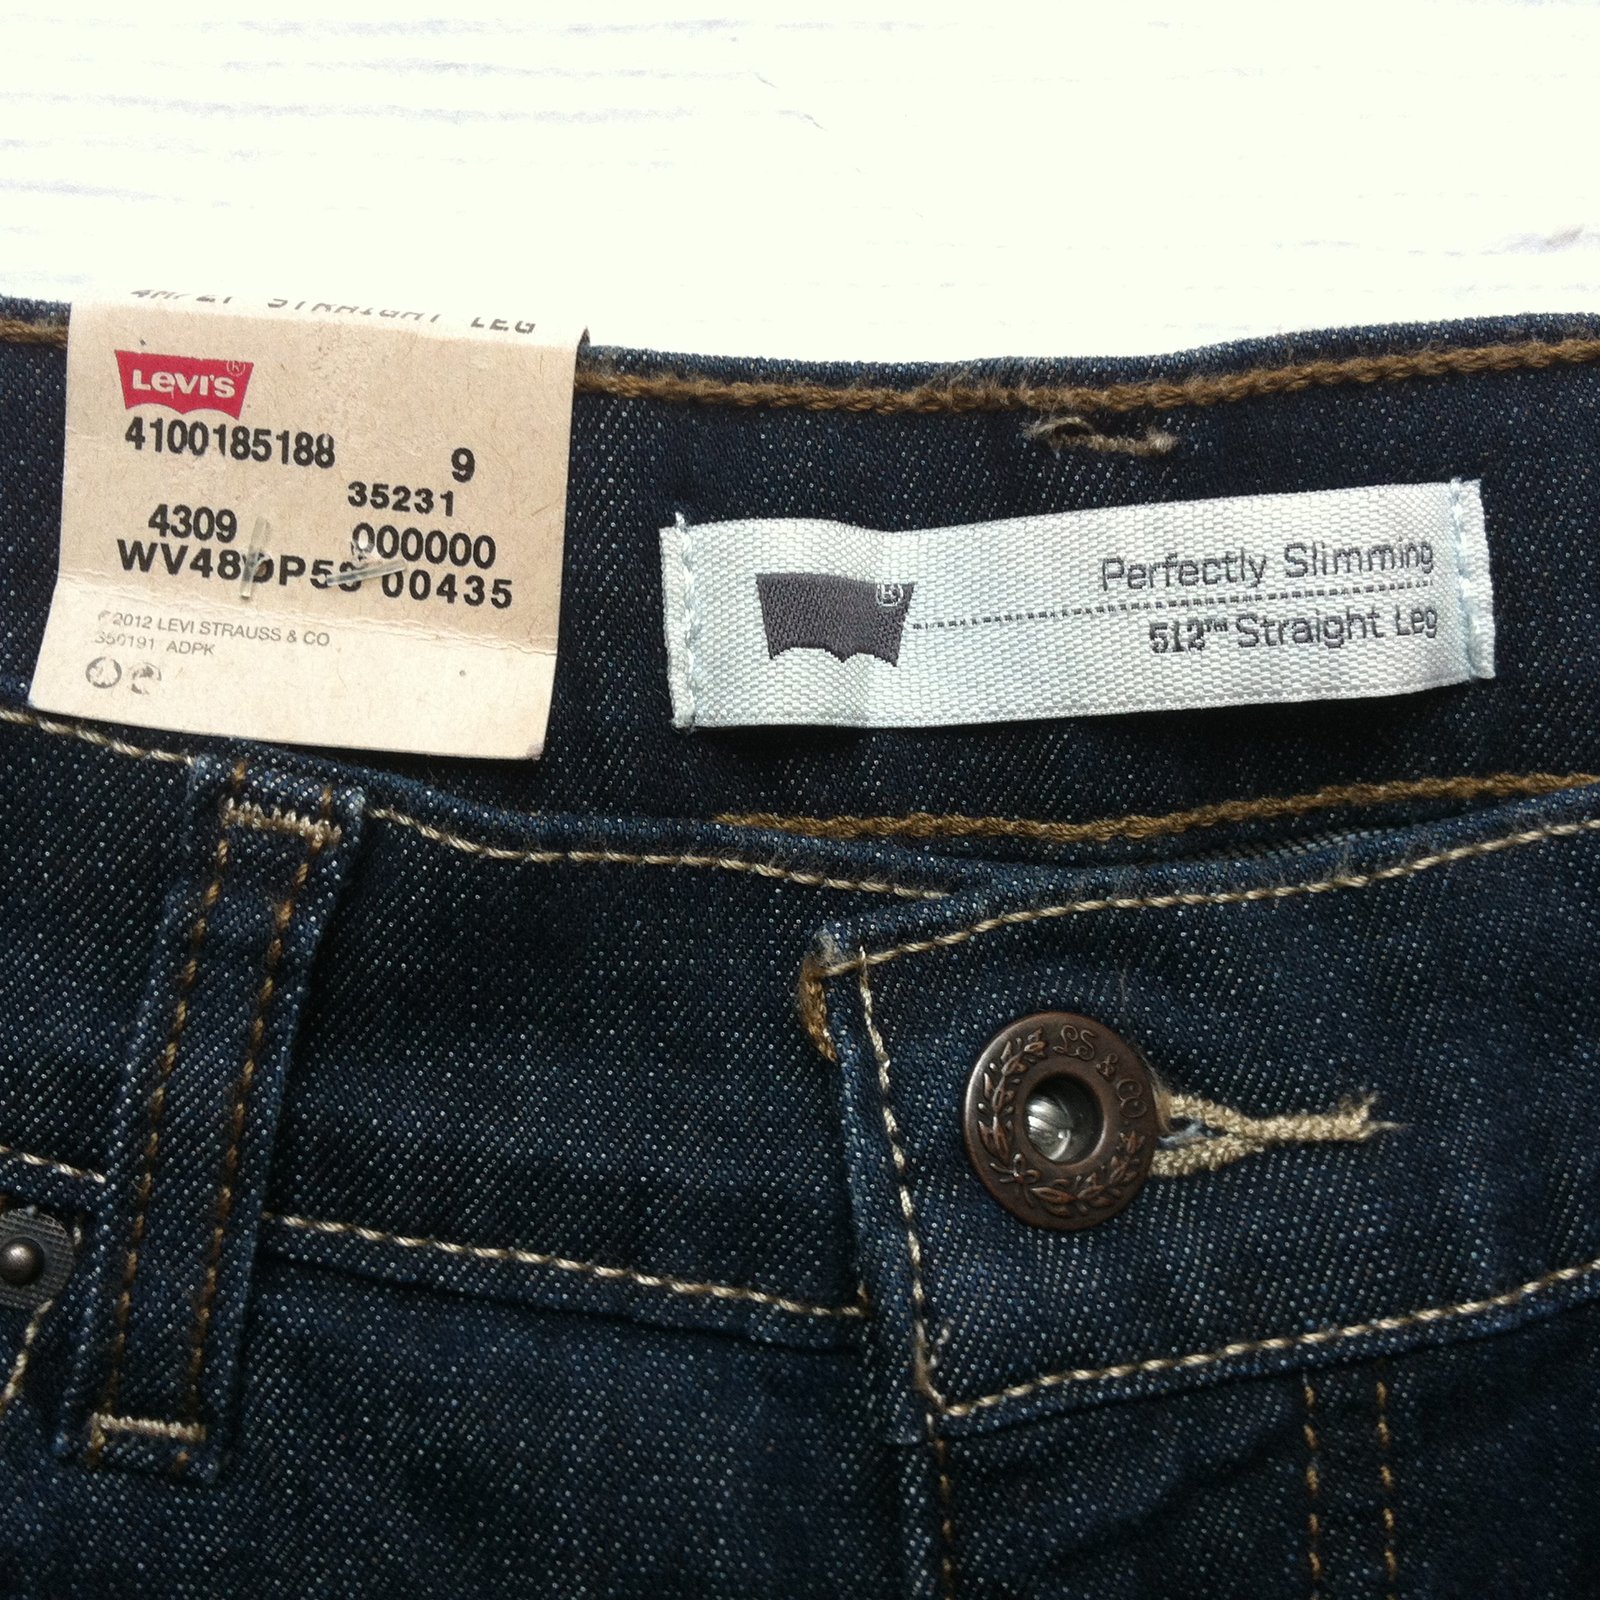 levi's perfectly slimming